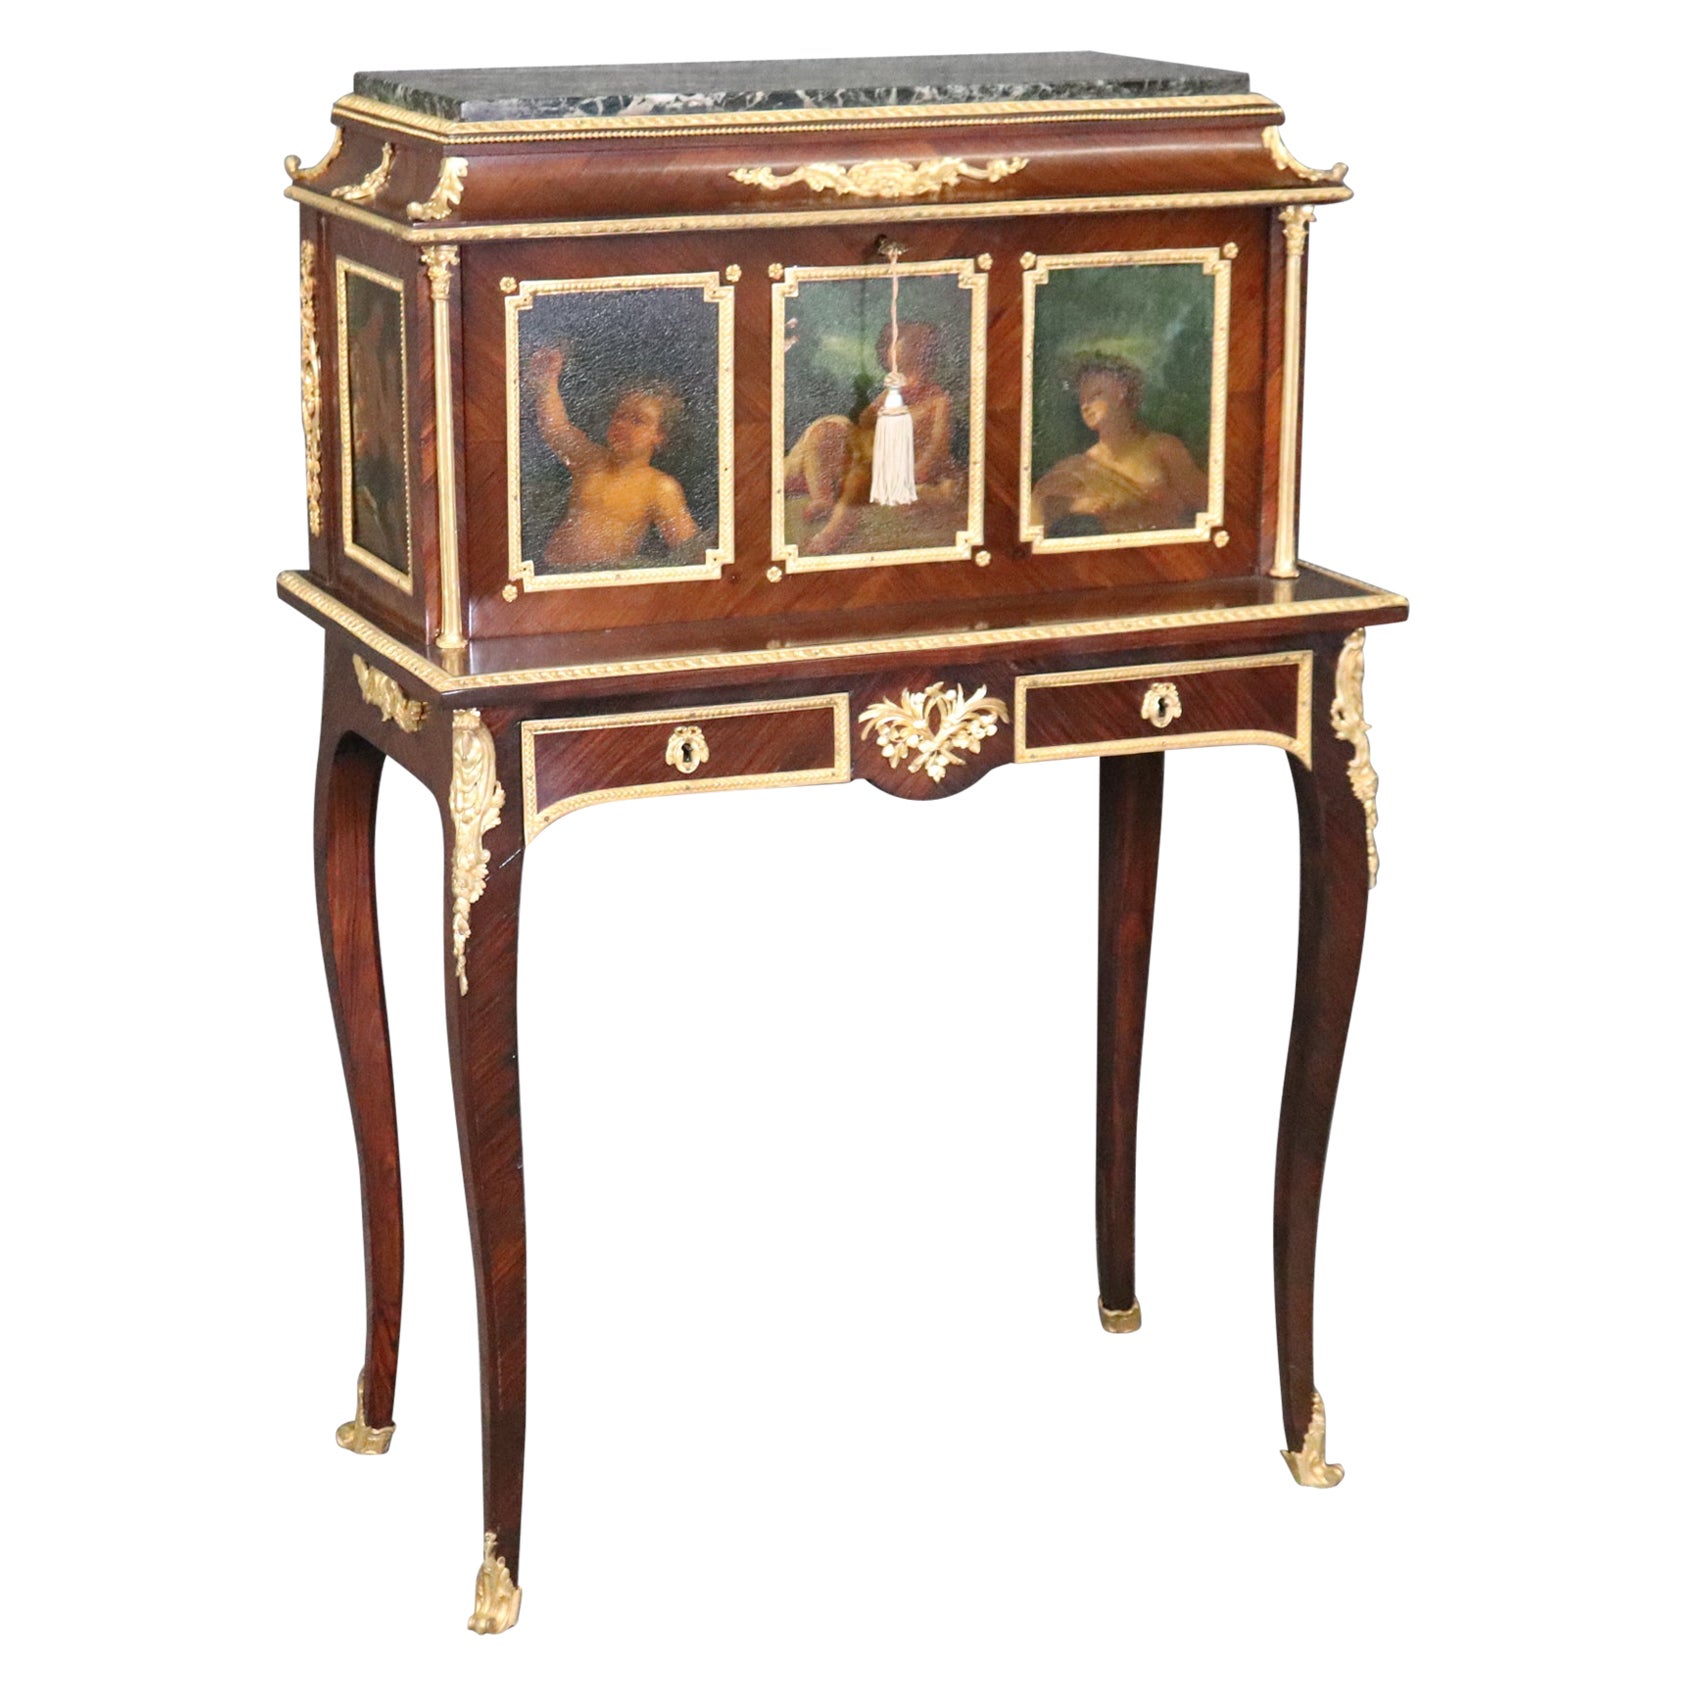 Exceptional Louis XV 19th Century Ormolu Mounted Secretaire By Befort Jeune For Sale